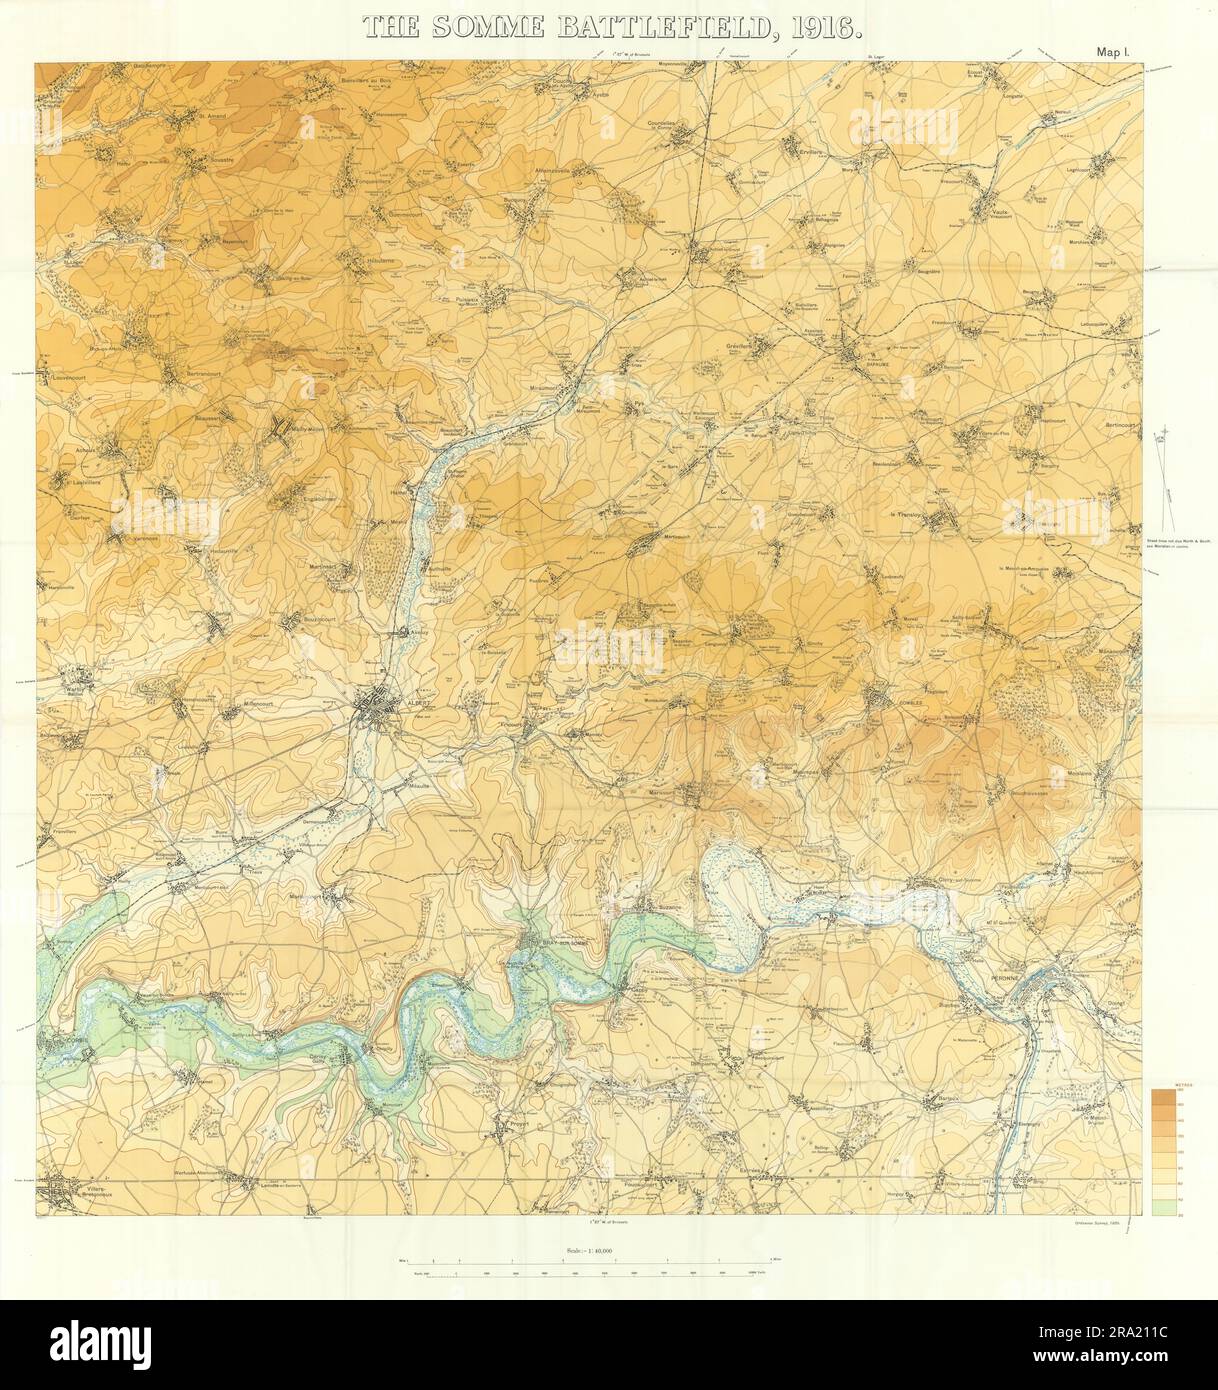 The Somme Battlefield, 1916. Battle of the Somme. First World War. 1932 map Stock Photo